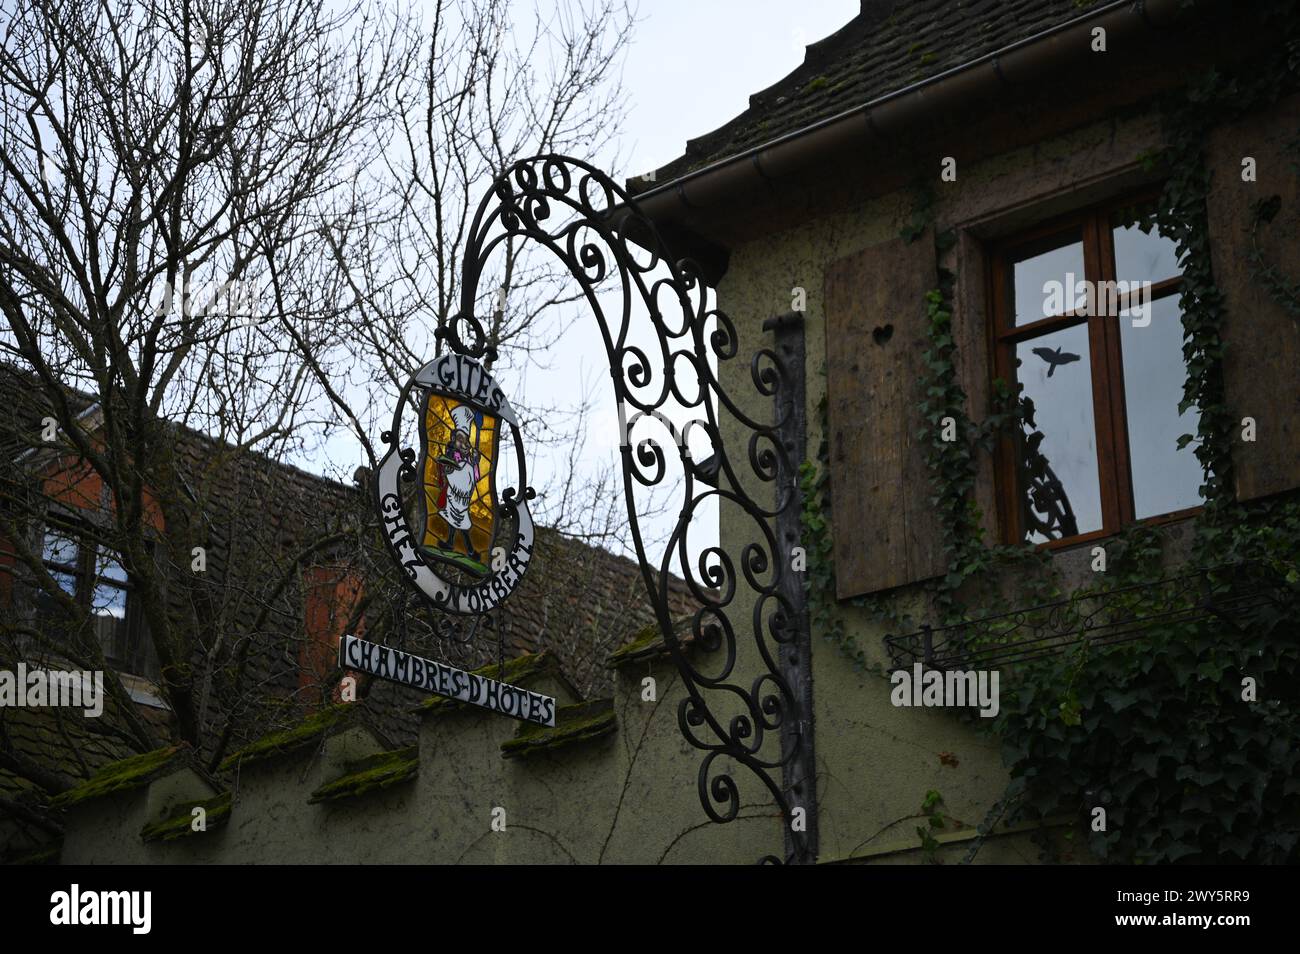 Antique handcrafted forged iron sign of a local shop in Bergheim, Alsace France. Stock Photo